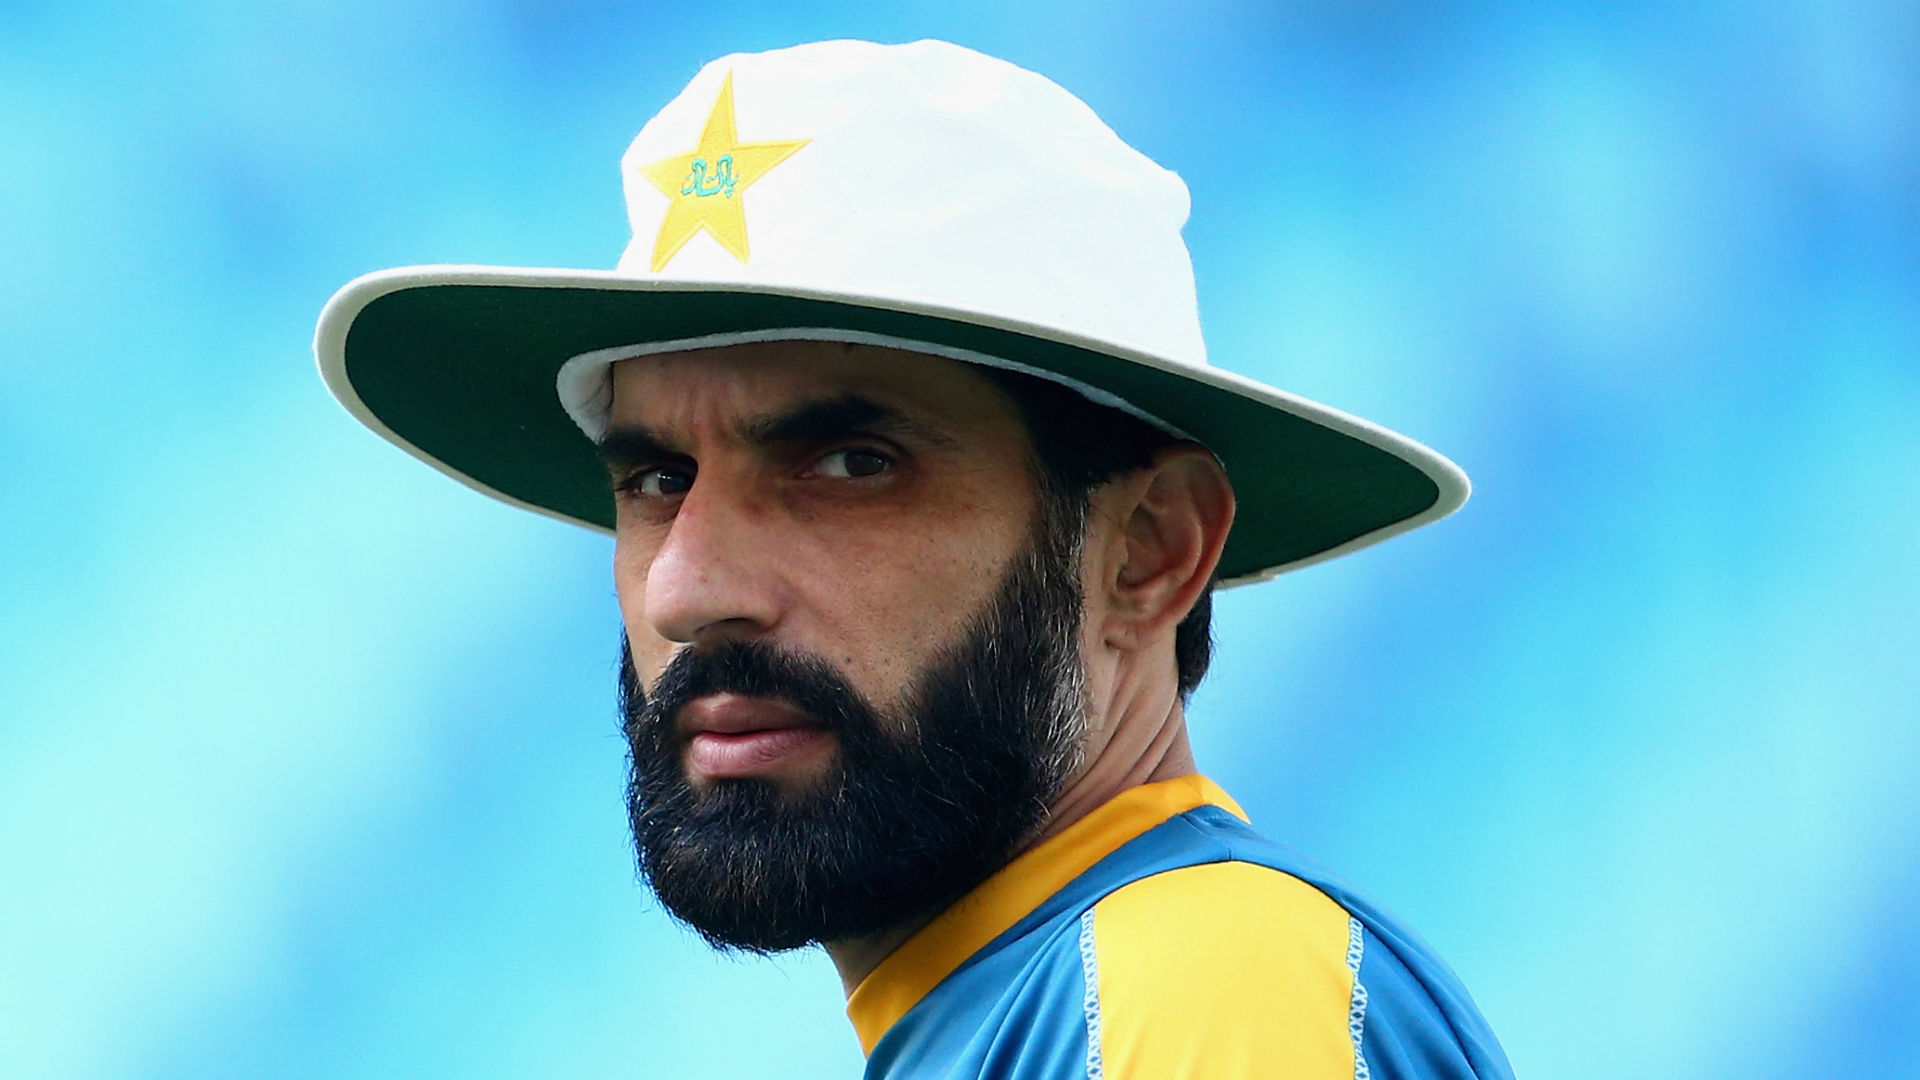 Misbah-ul-Haq says Pakistan are raring to go for the Test series against South Africa naming a 17-man squad.